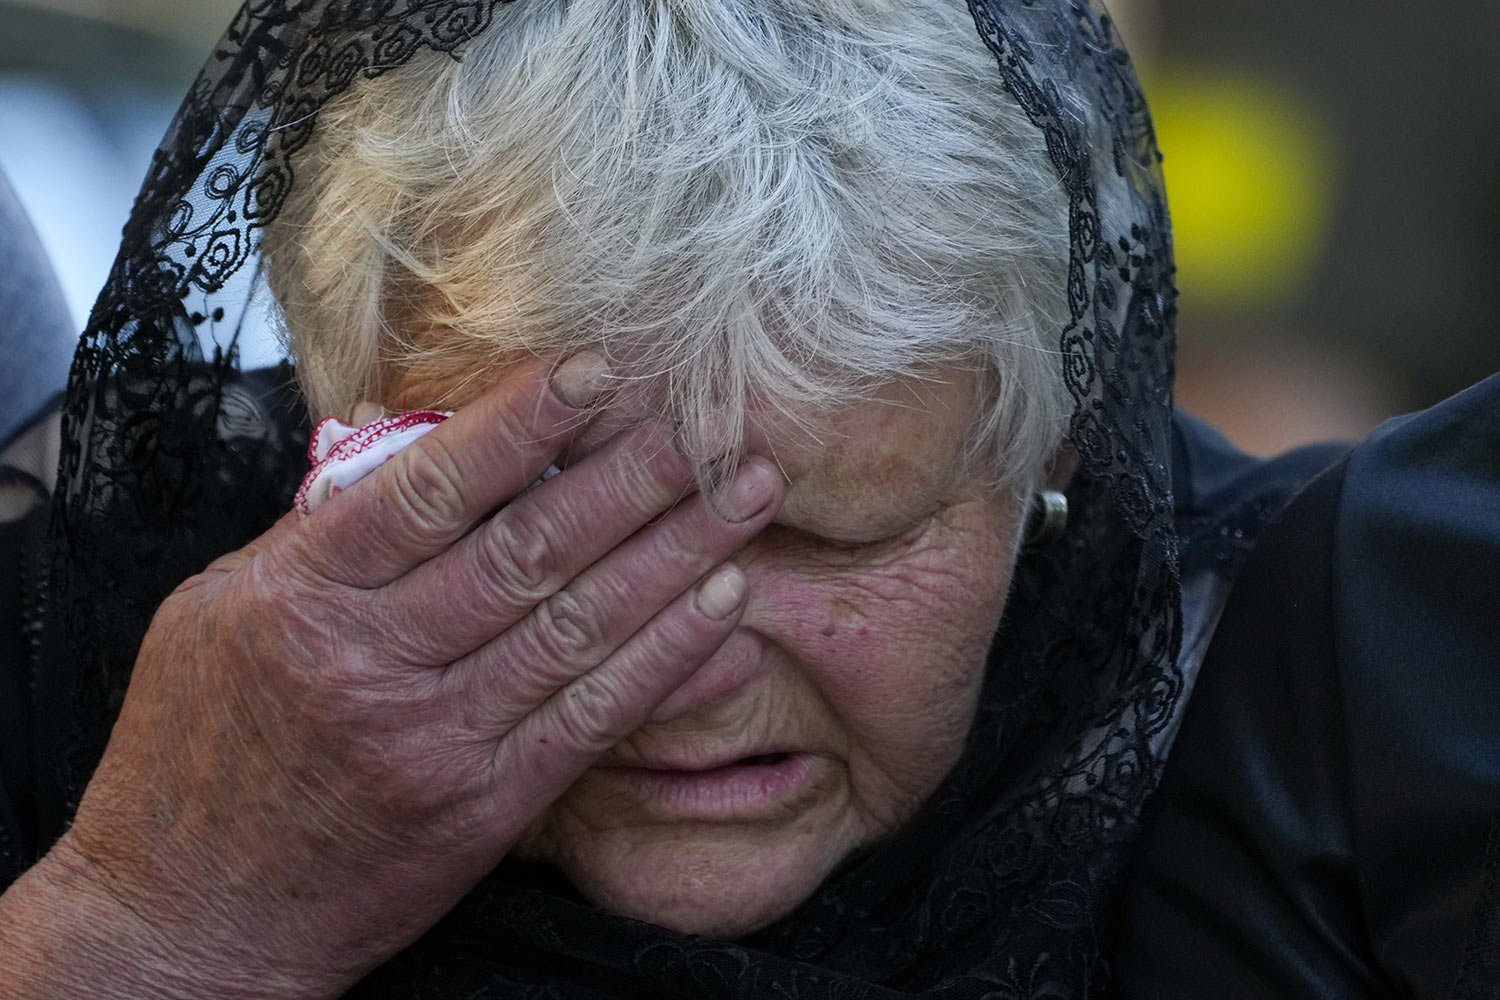  The mother of Army Col. Oleksander Makhachek mourns during his funeral service in Zhytomyr, Ukraine, Friday, June 3, 2022. According to combat comrades, Makhachek was killed fighting Russian forces when a shell landed in his position on May 30. (AP 